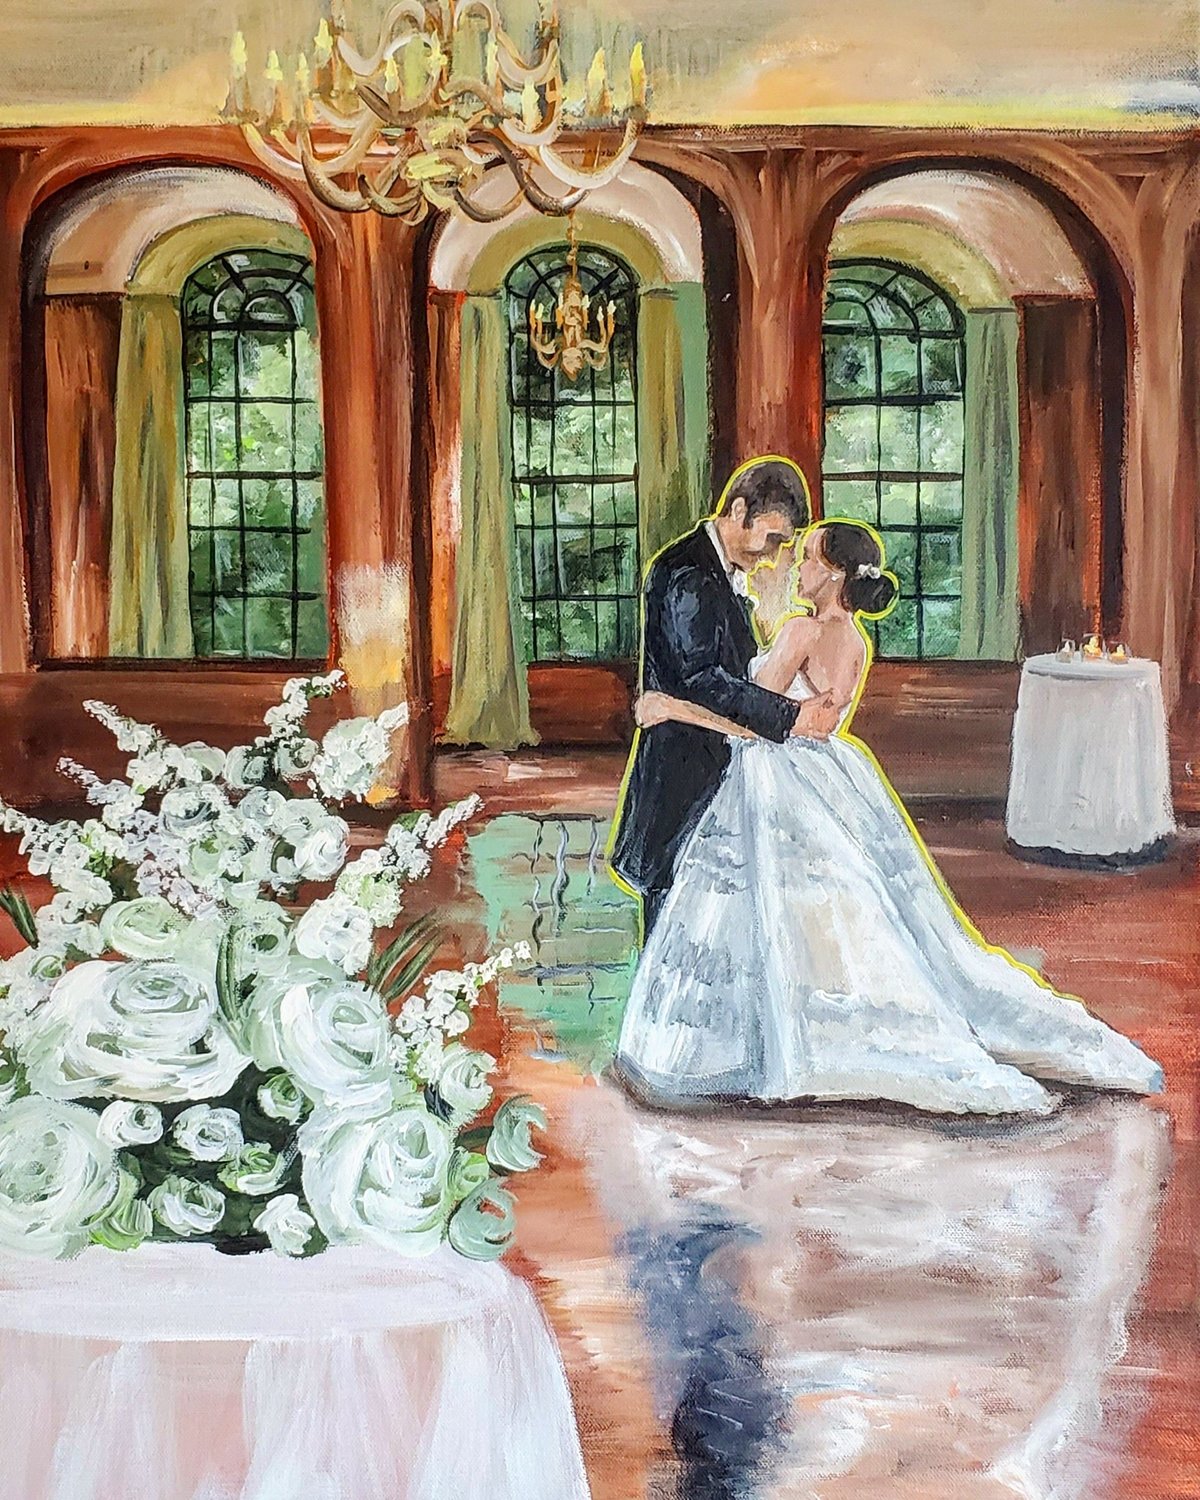 Intimate first dance live wedding painting at the Baltimore Country Club. Couple in wedding attire snuggle on the dance floor.